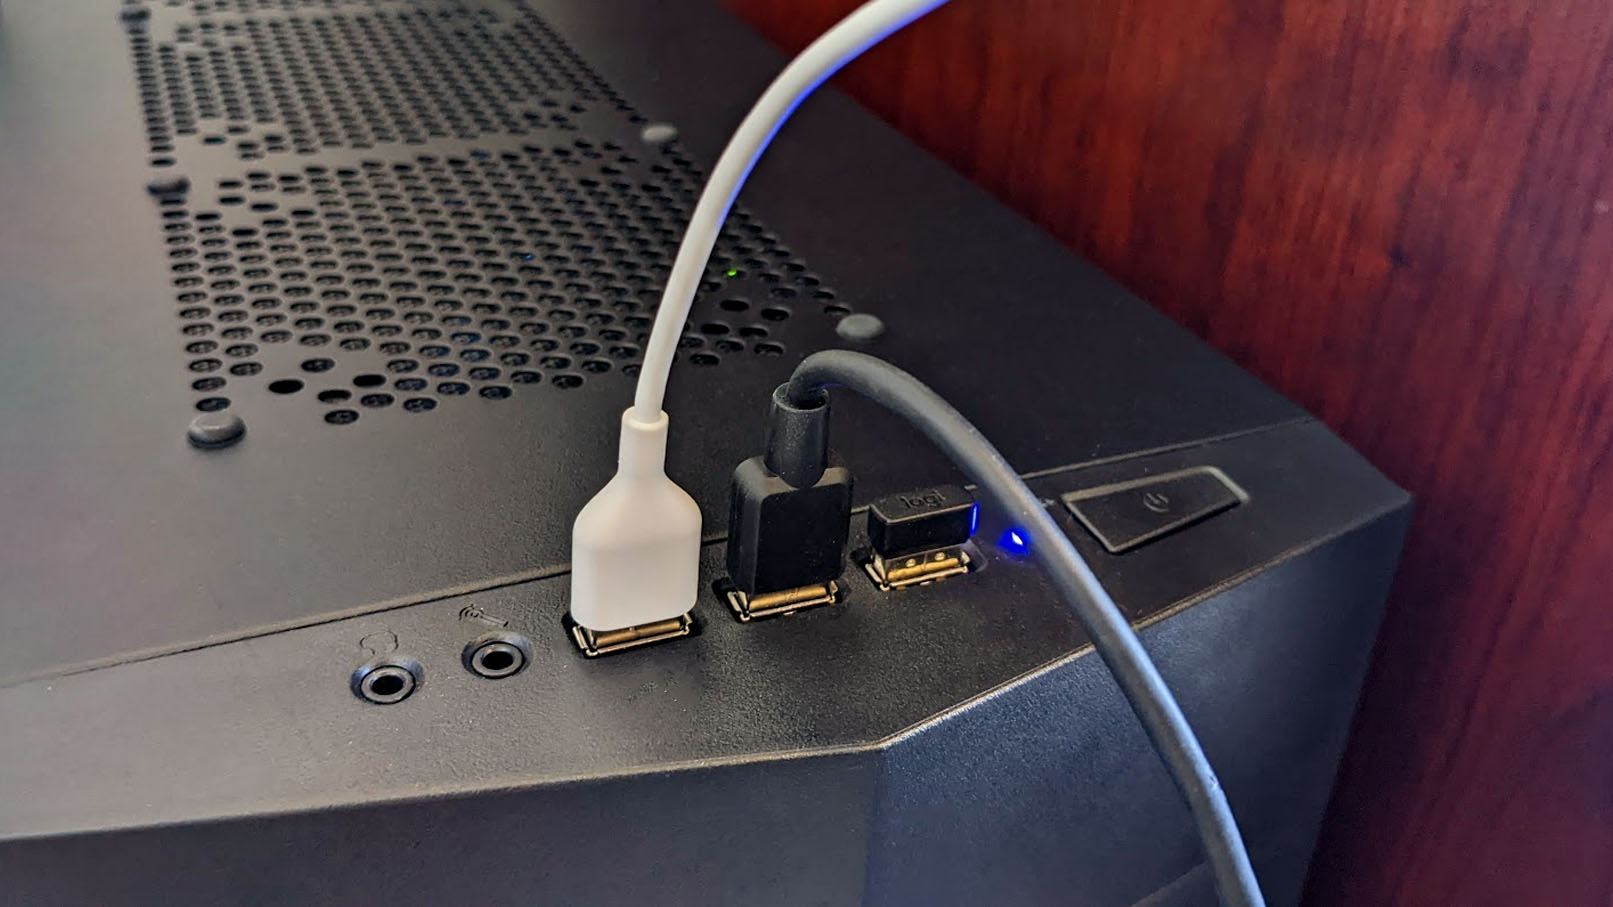 Plug Lightning Cable Into Pc